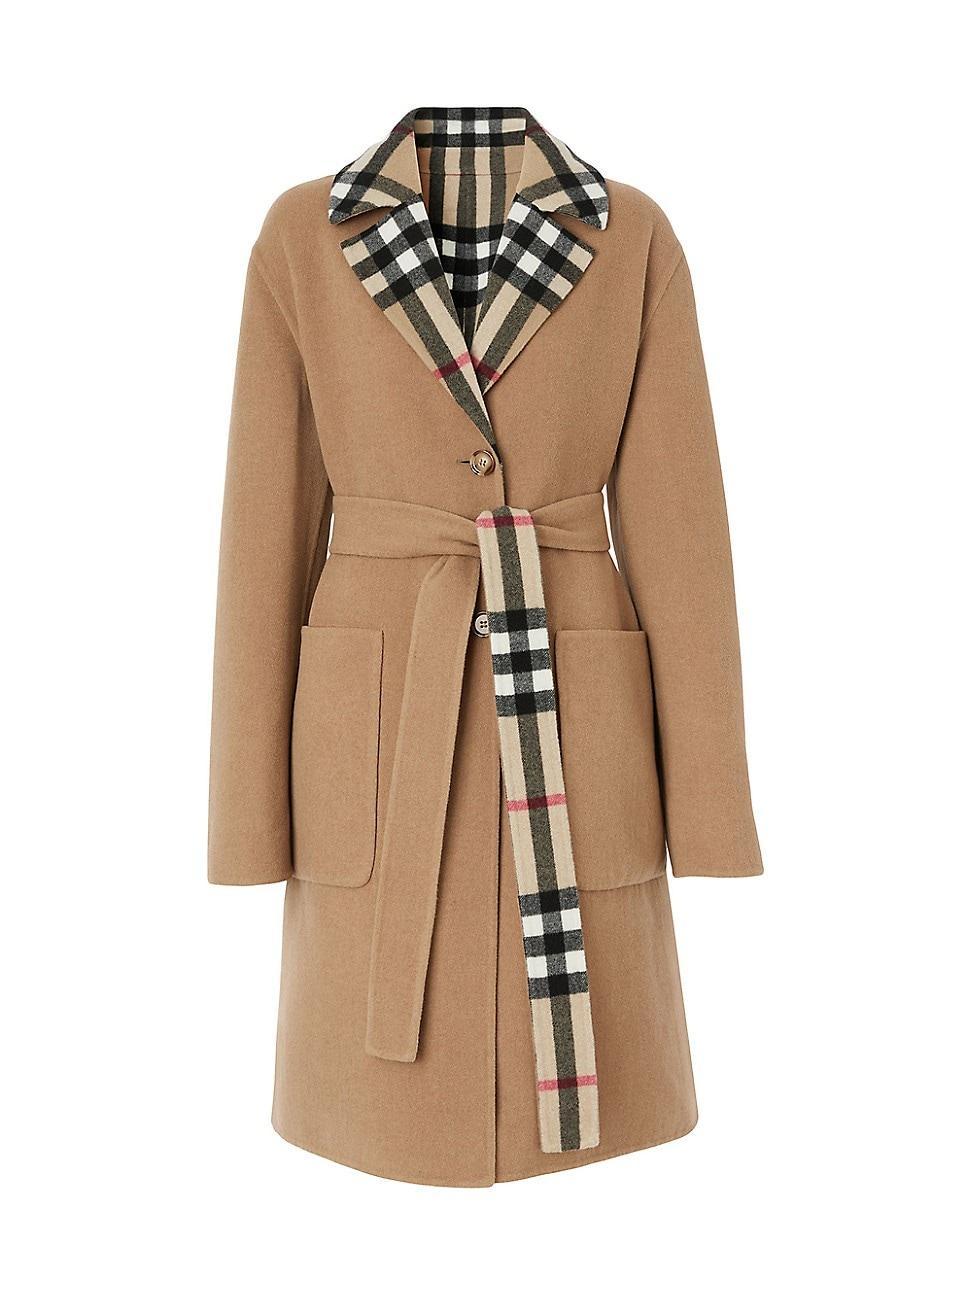 burberry Reversible Check Double Face Wool Coat Product Image